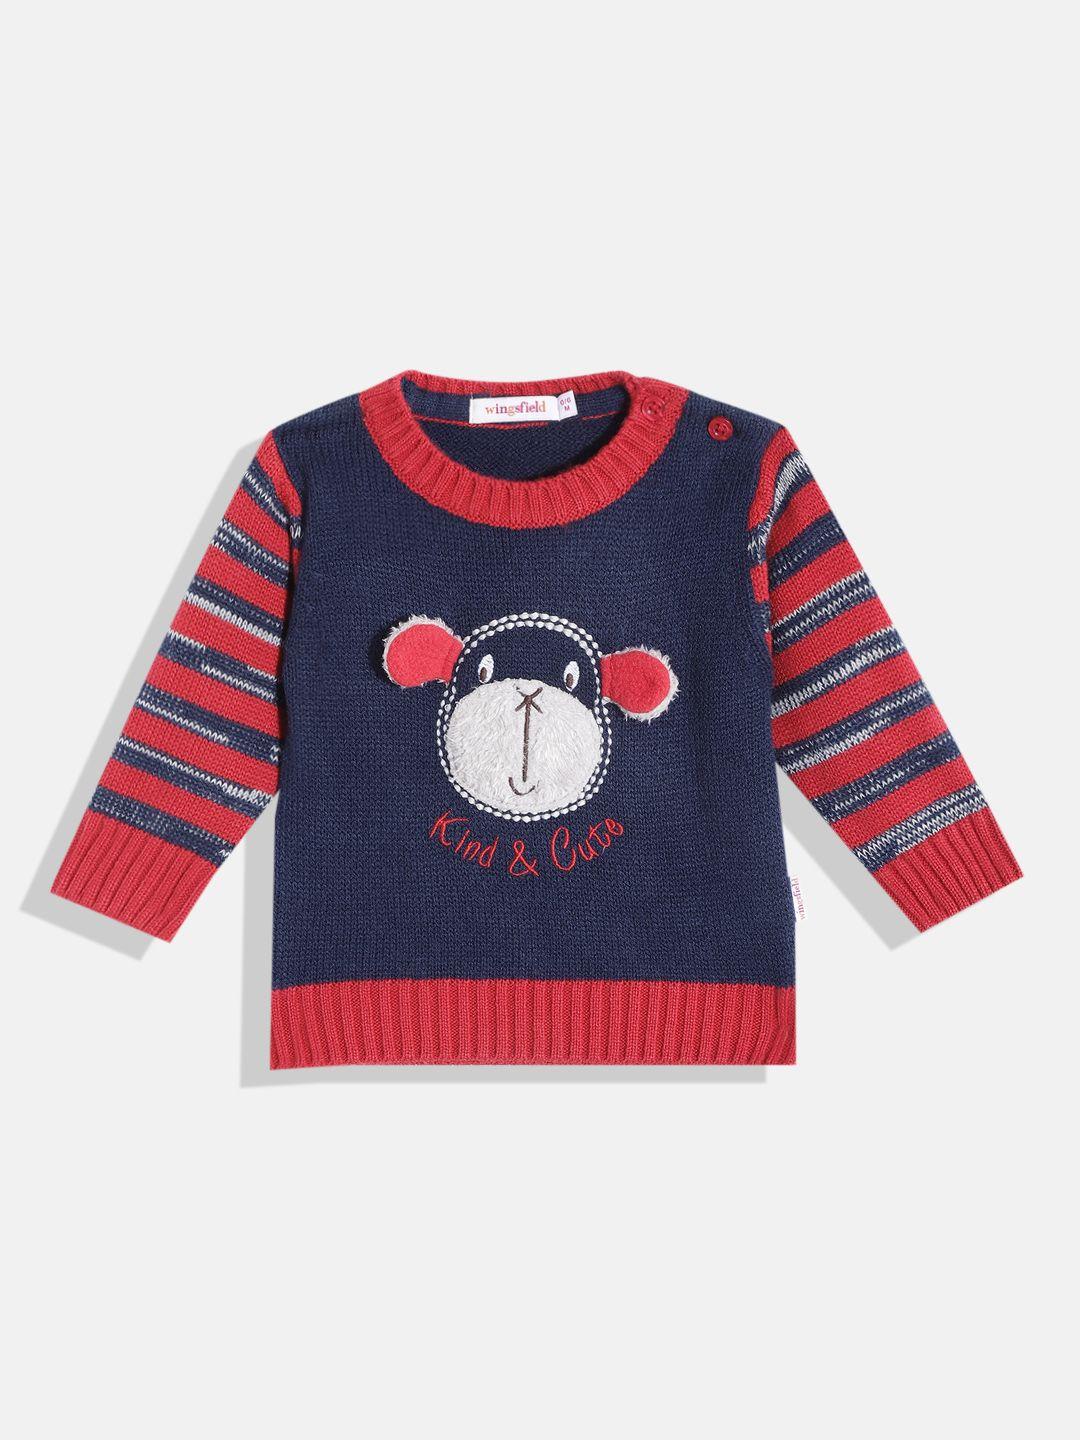 wingsfield boys navy blue & red printed pullover with applique detail